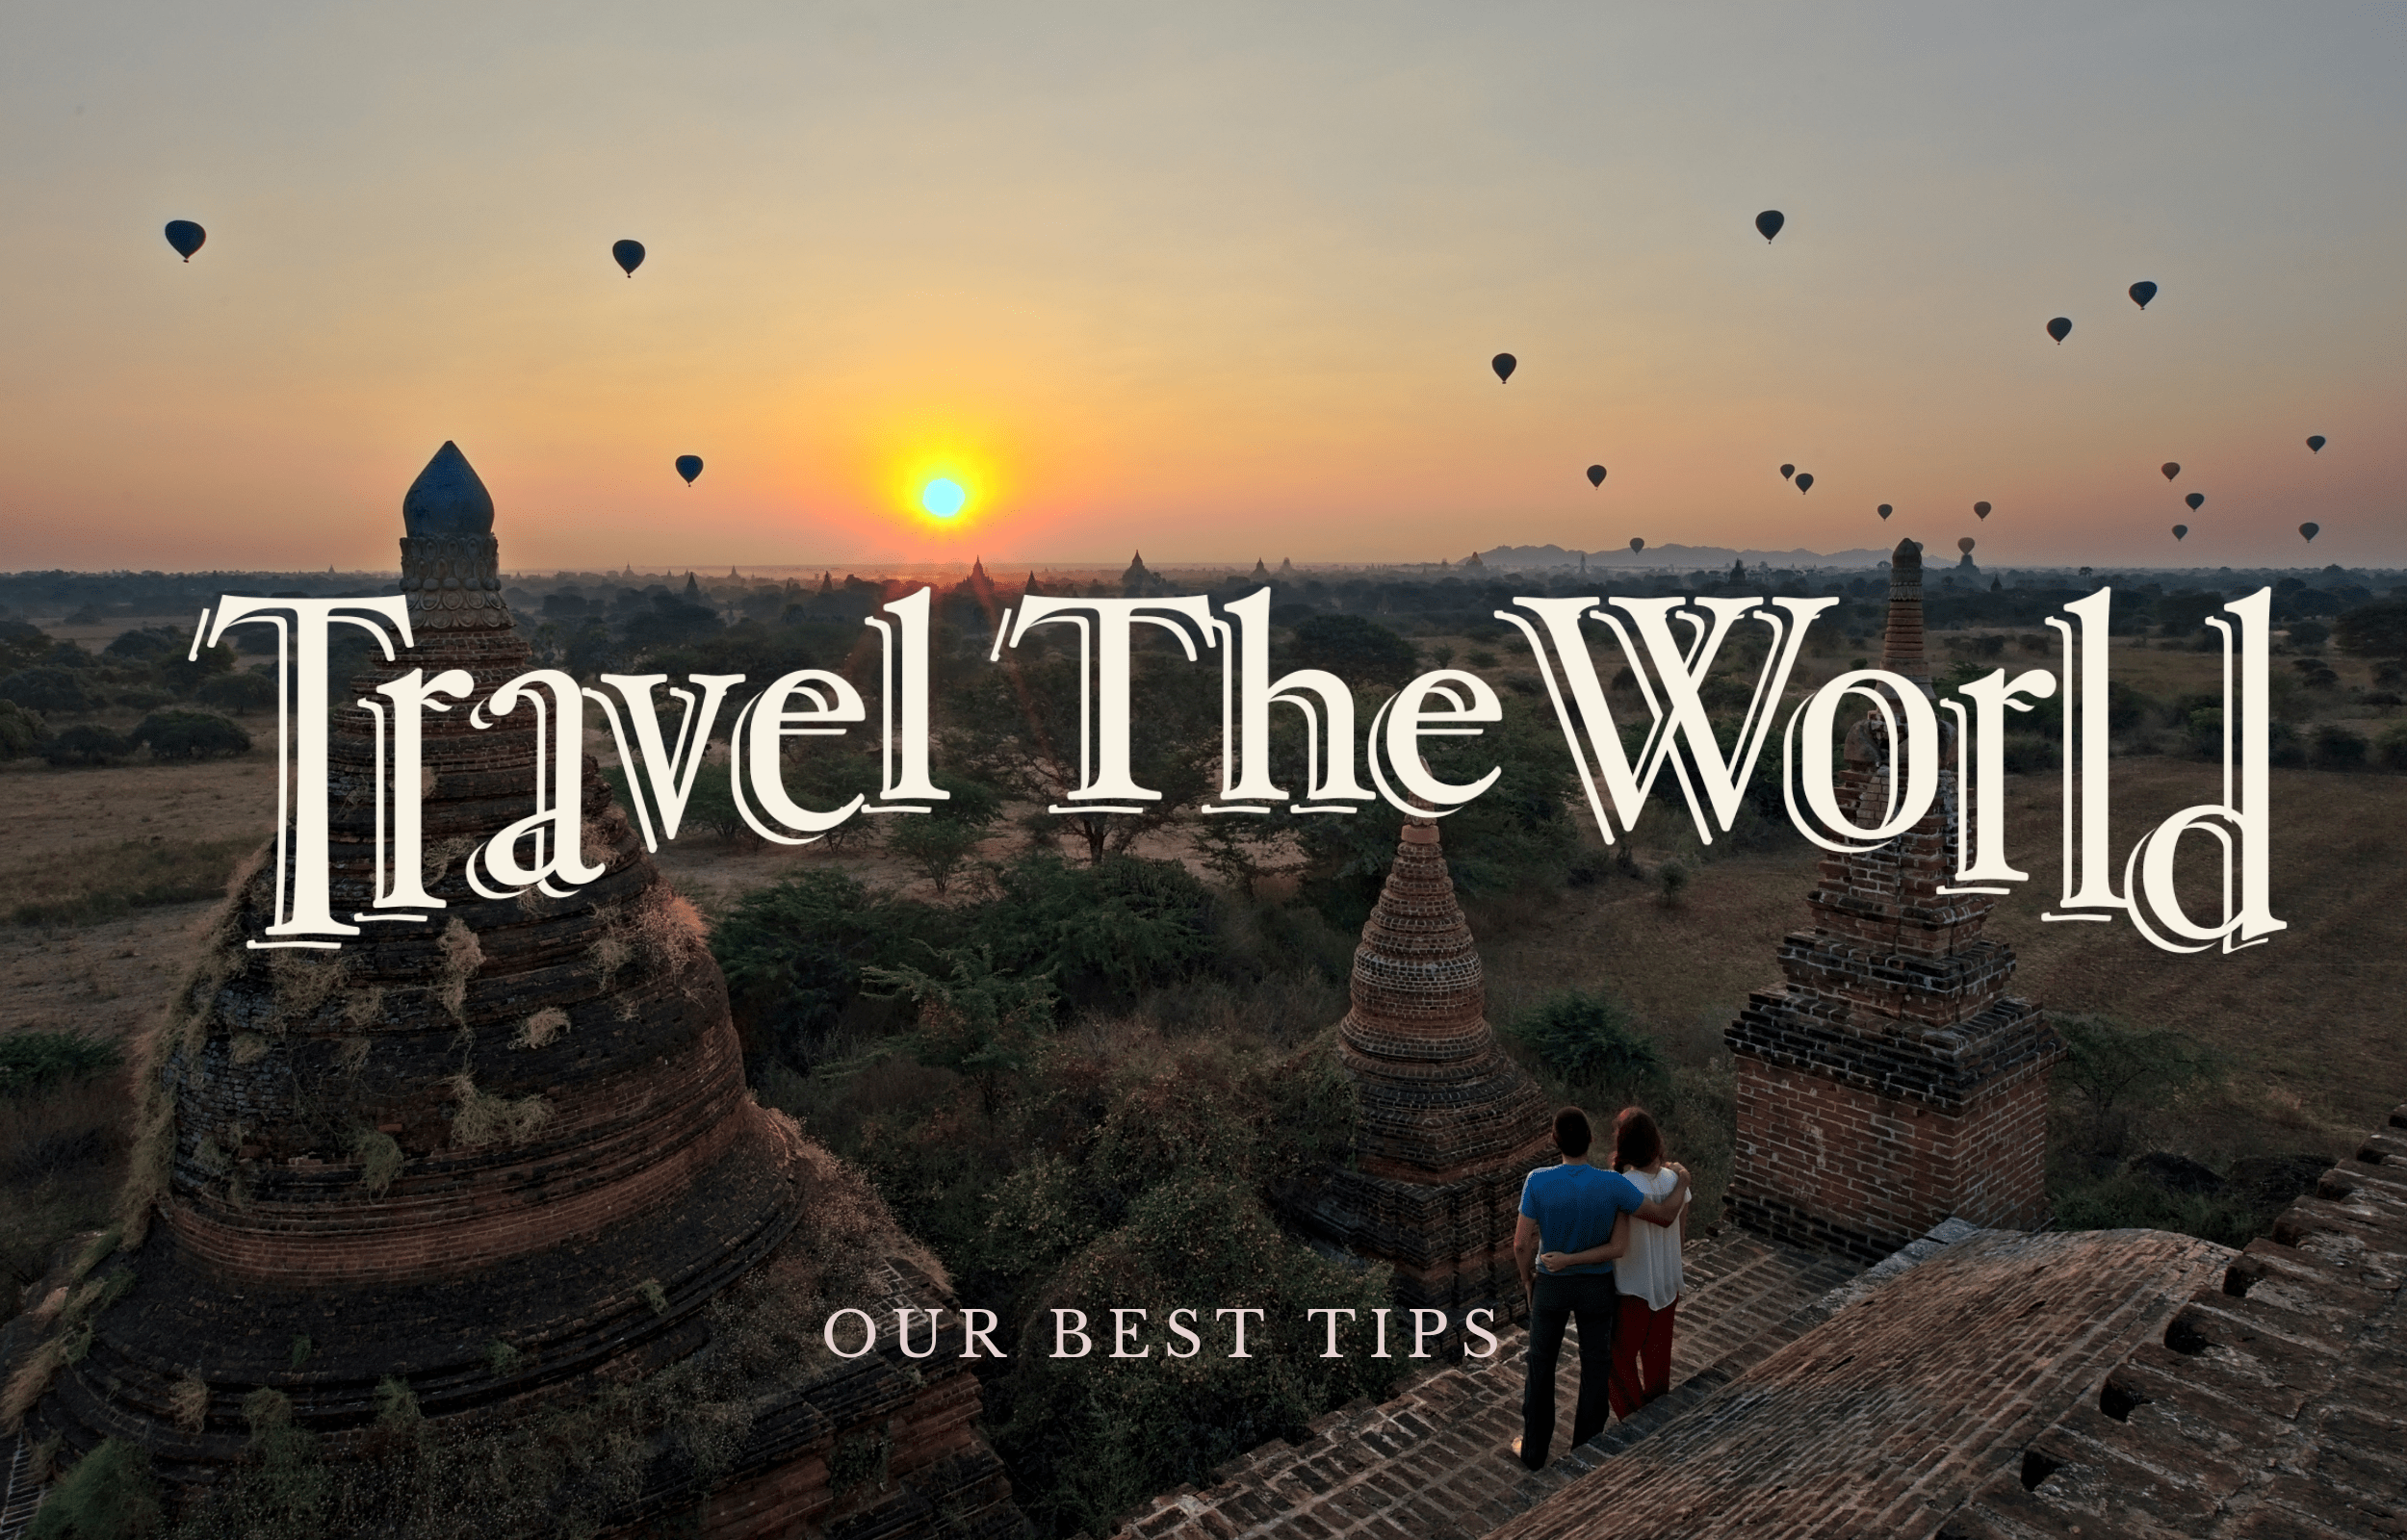 how to travel around the world for free